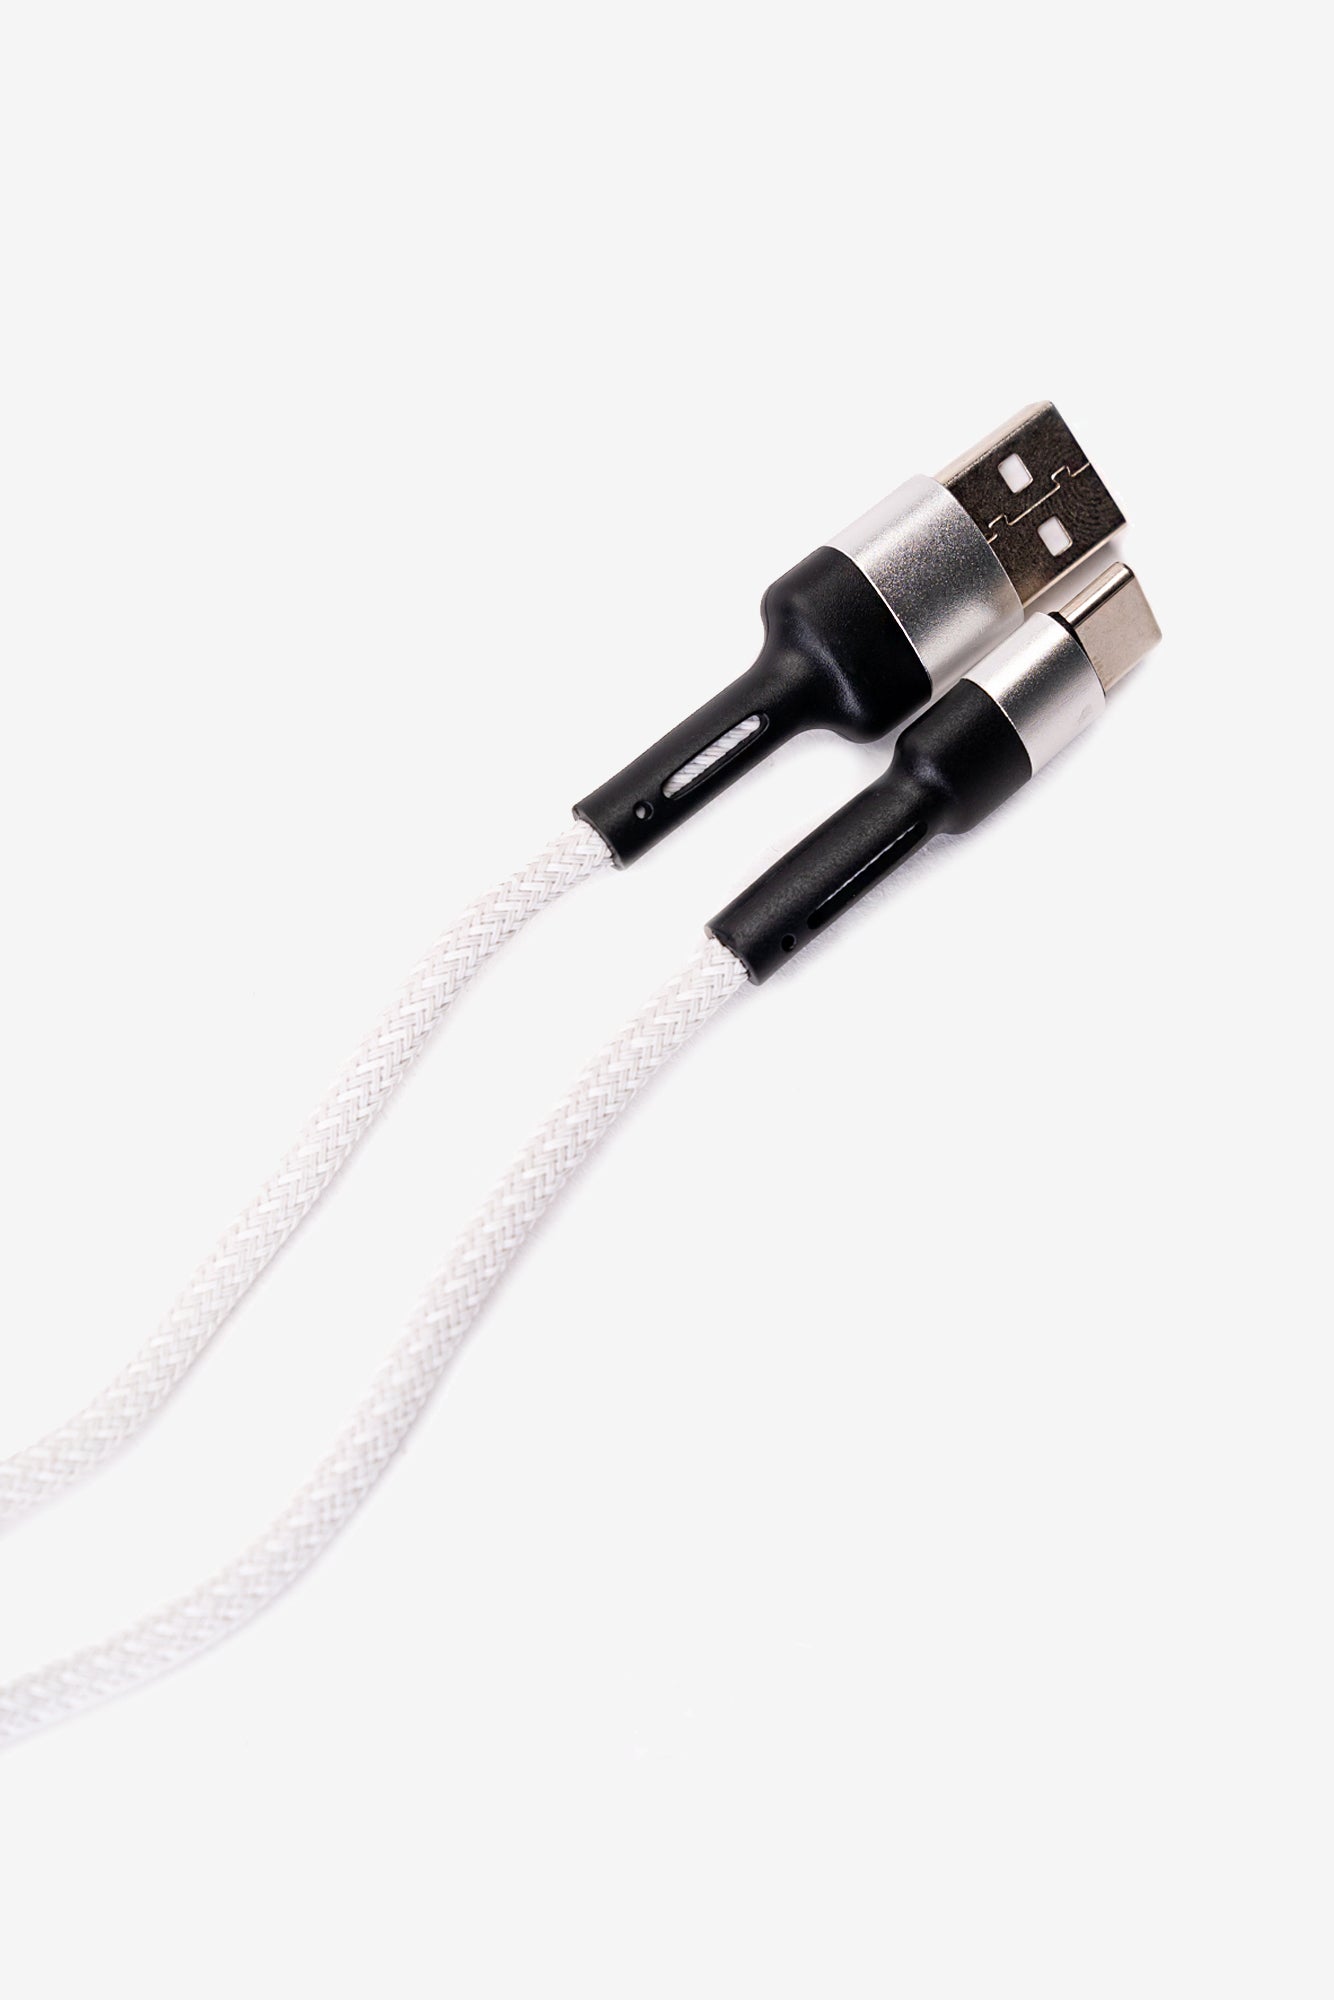 Cable USB - Tipo C Chinitown Chinitown